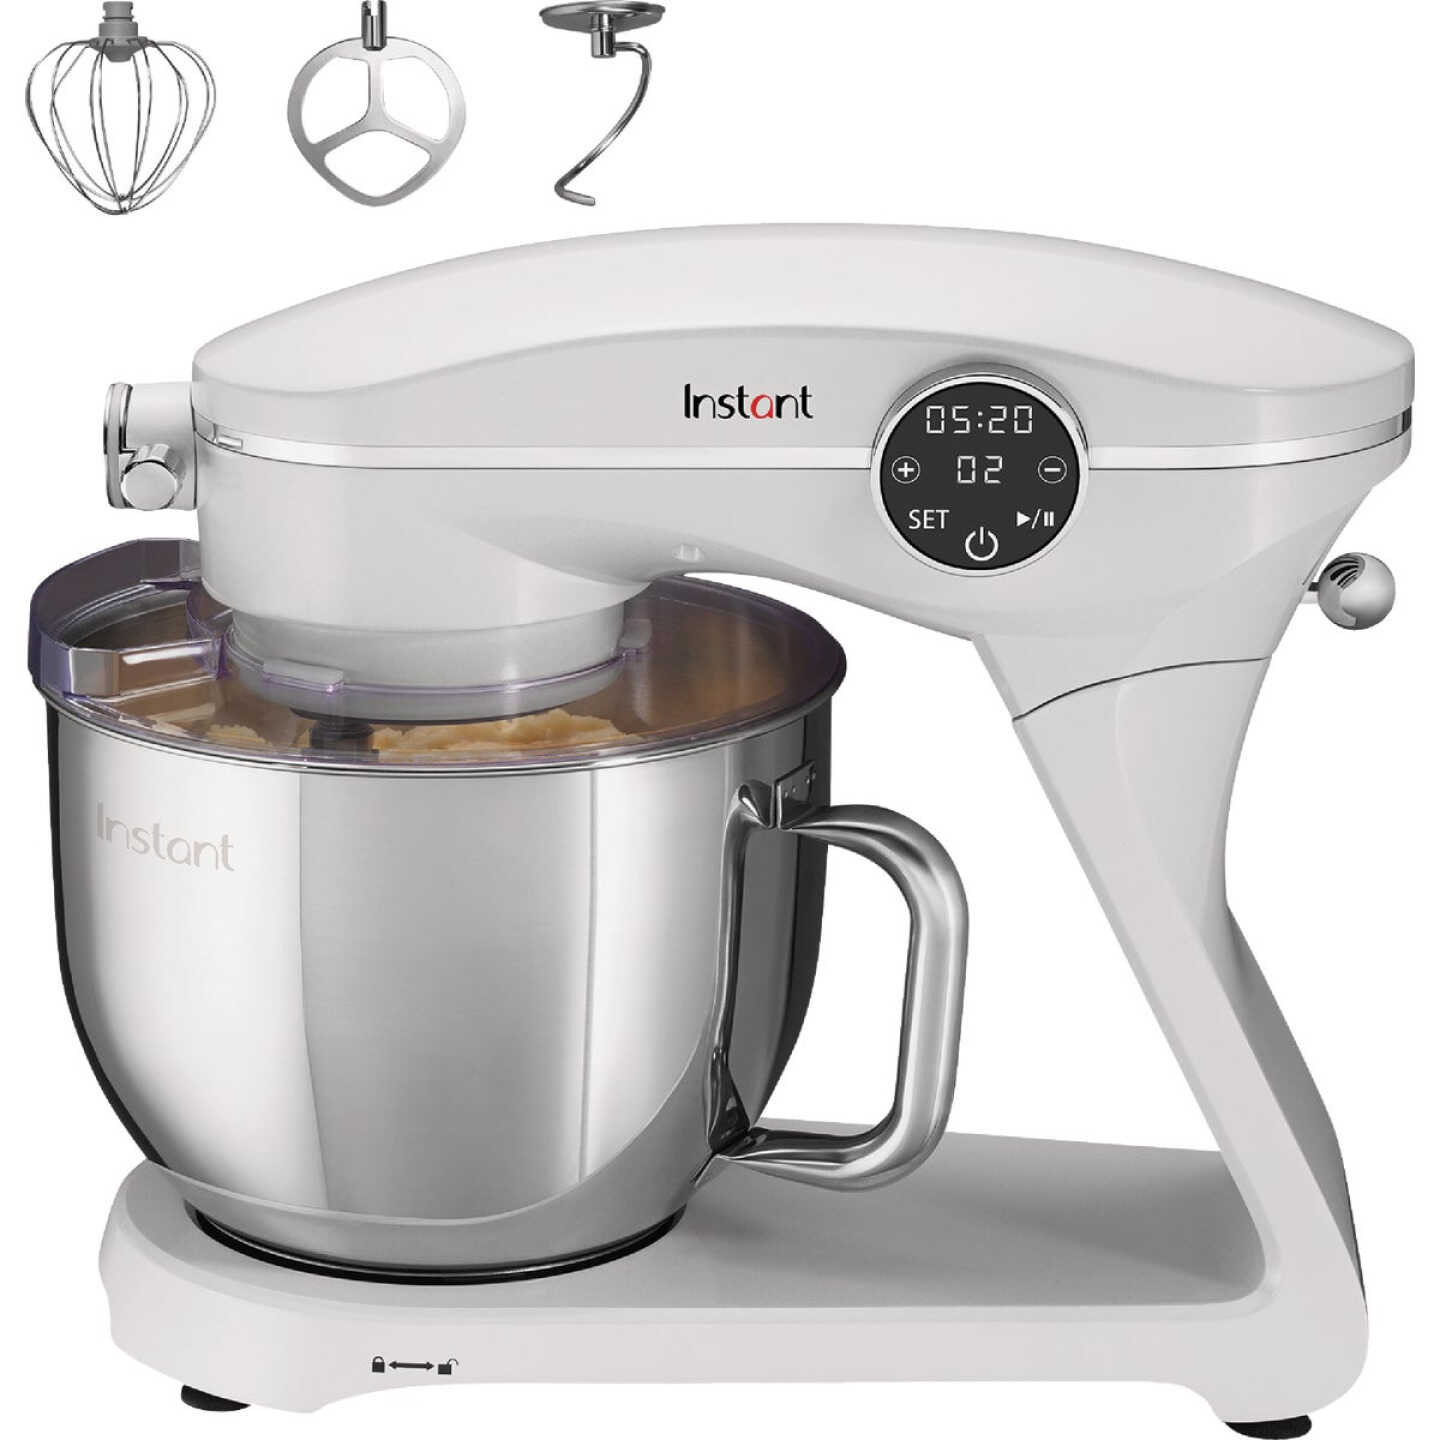 NEW KitchenAid Mixer White 5QT + 12 cup glass mixer bowl with lid -  household items - by owner - housewares sale 